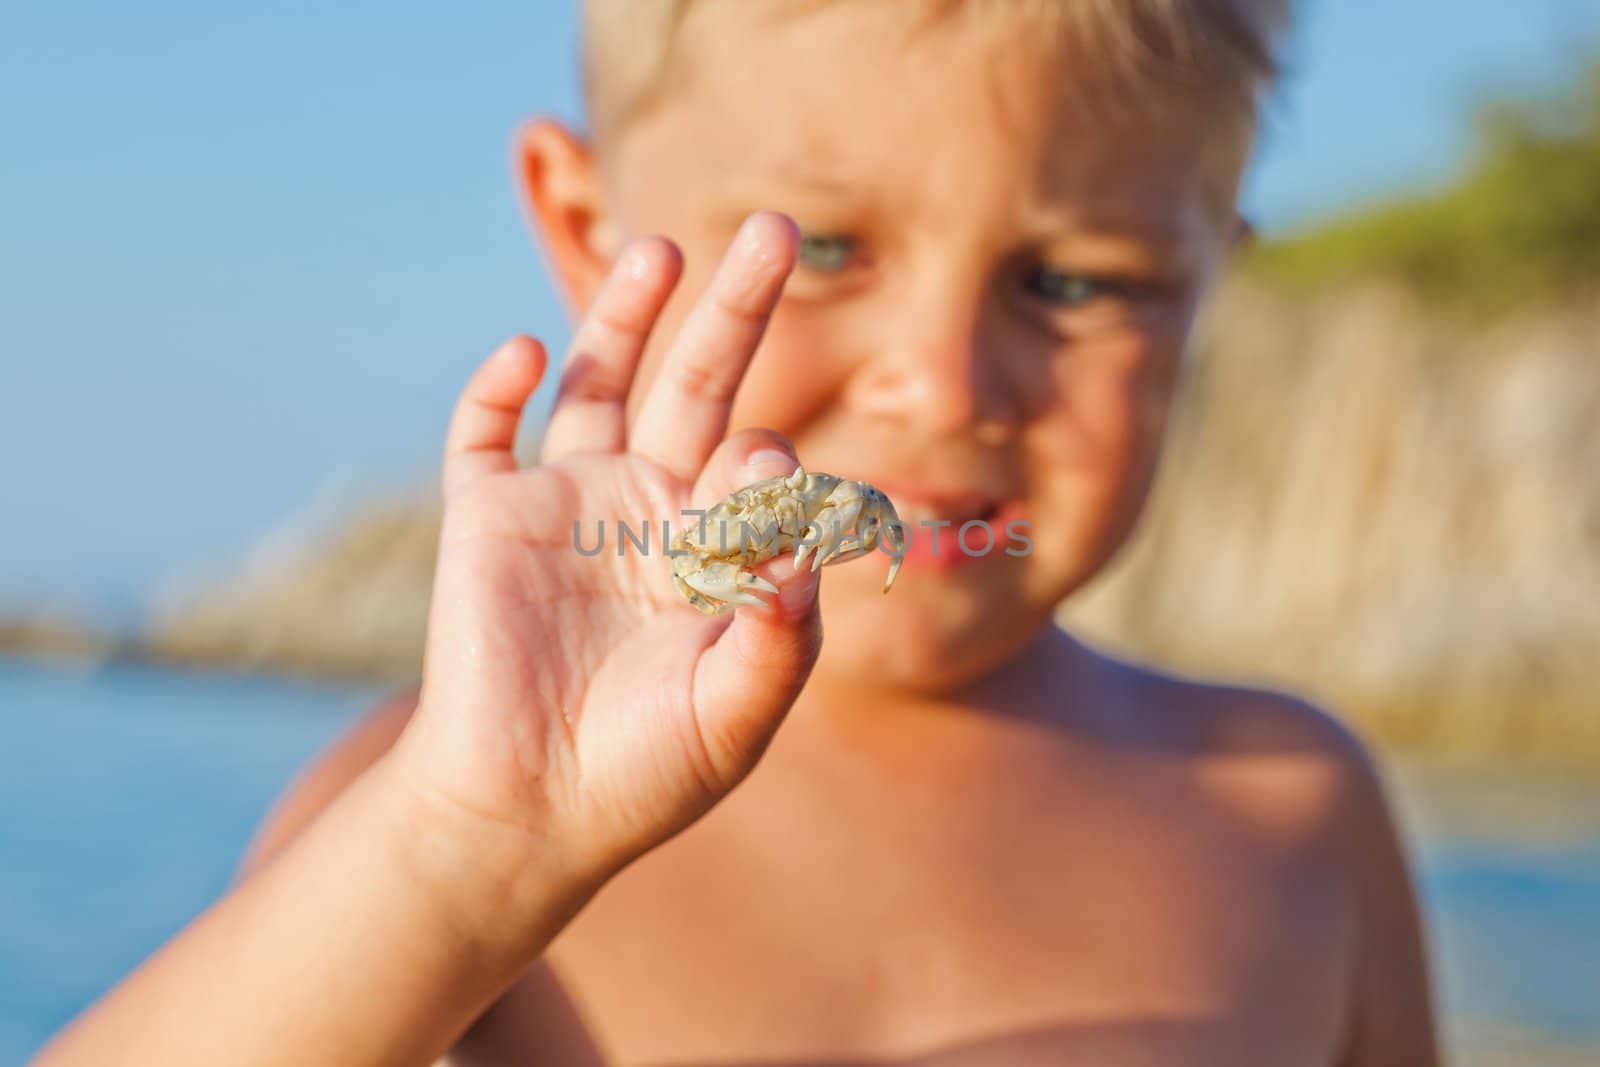 Adorable boy holding crab on hand on the beach. Focus on the crab.